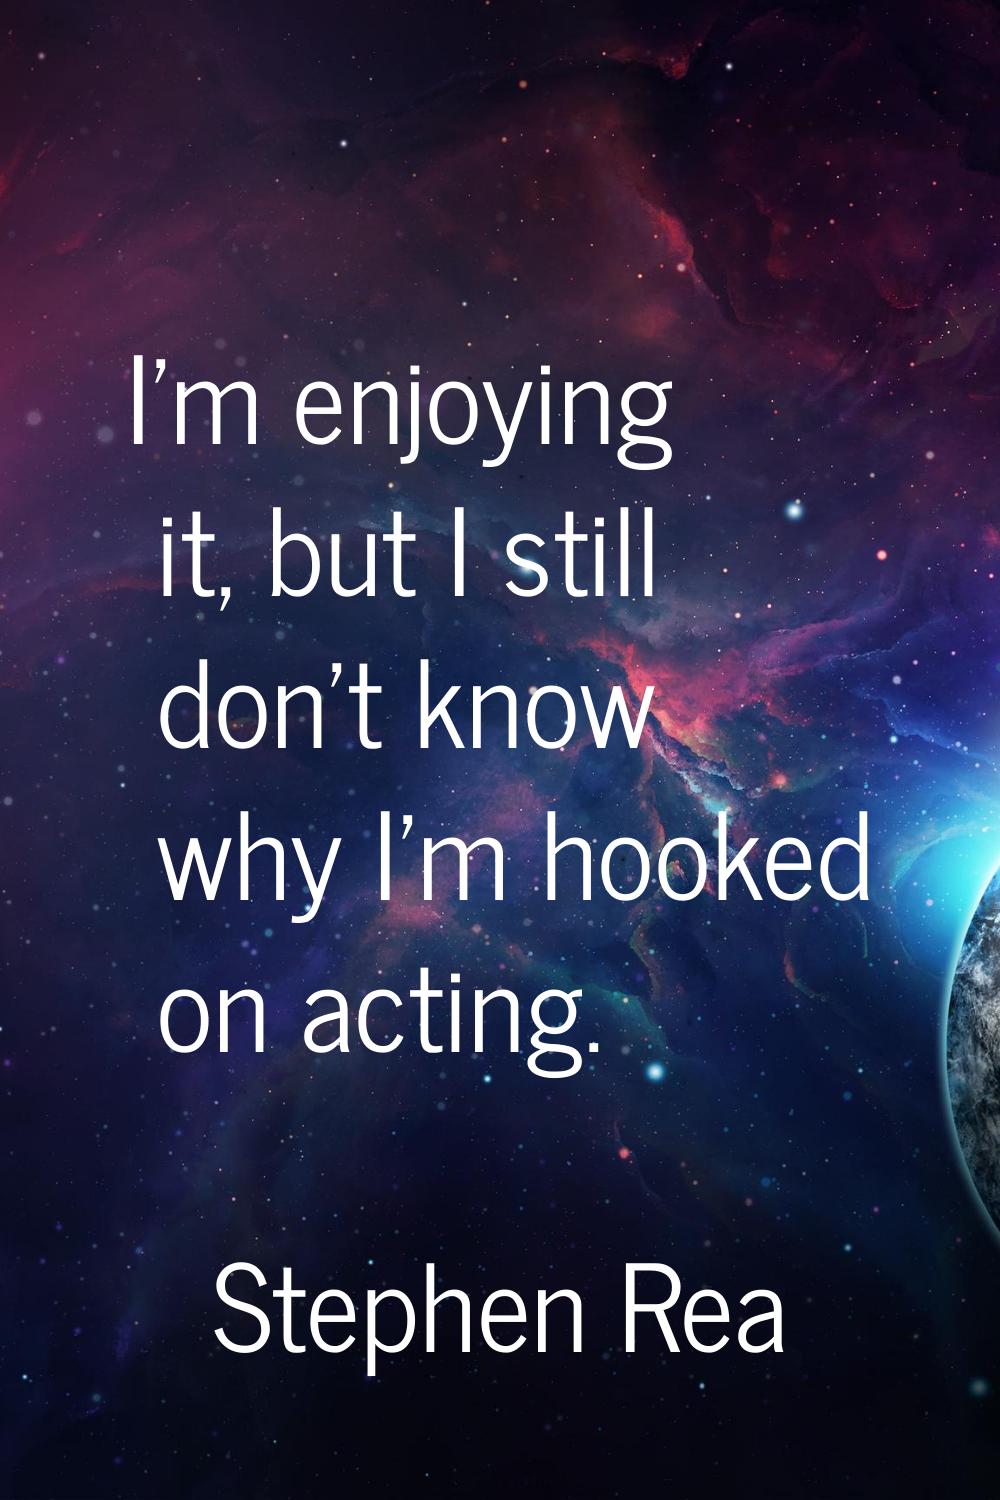 I'm enjoying it, but I still don't know why I'm hooked on acting.